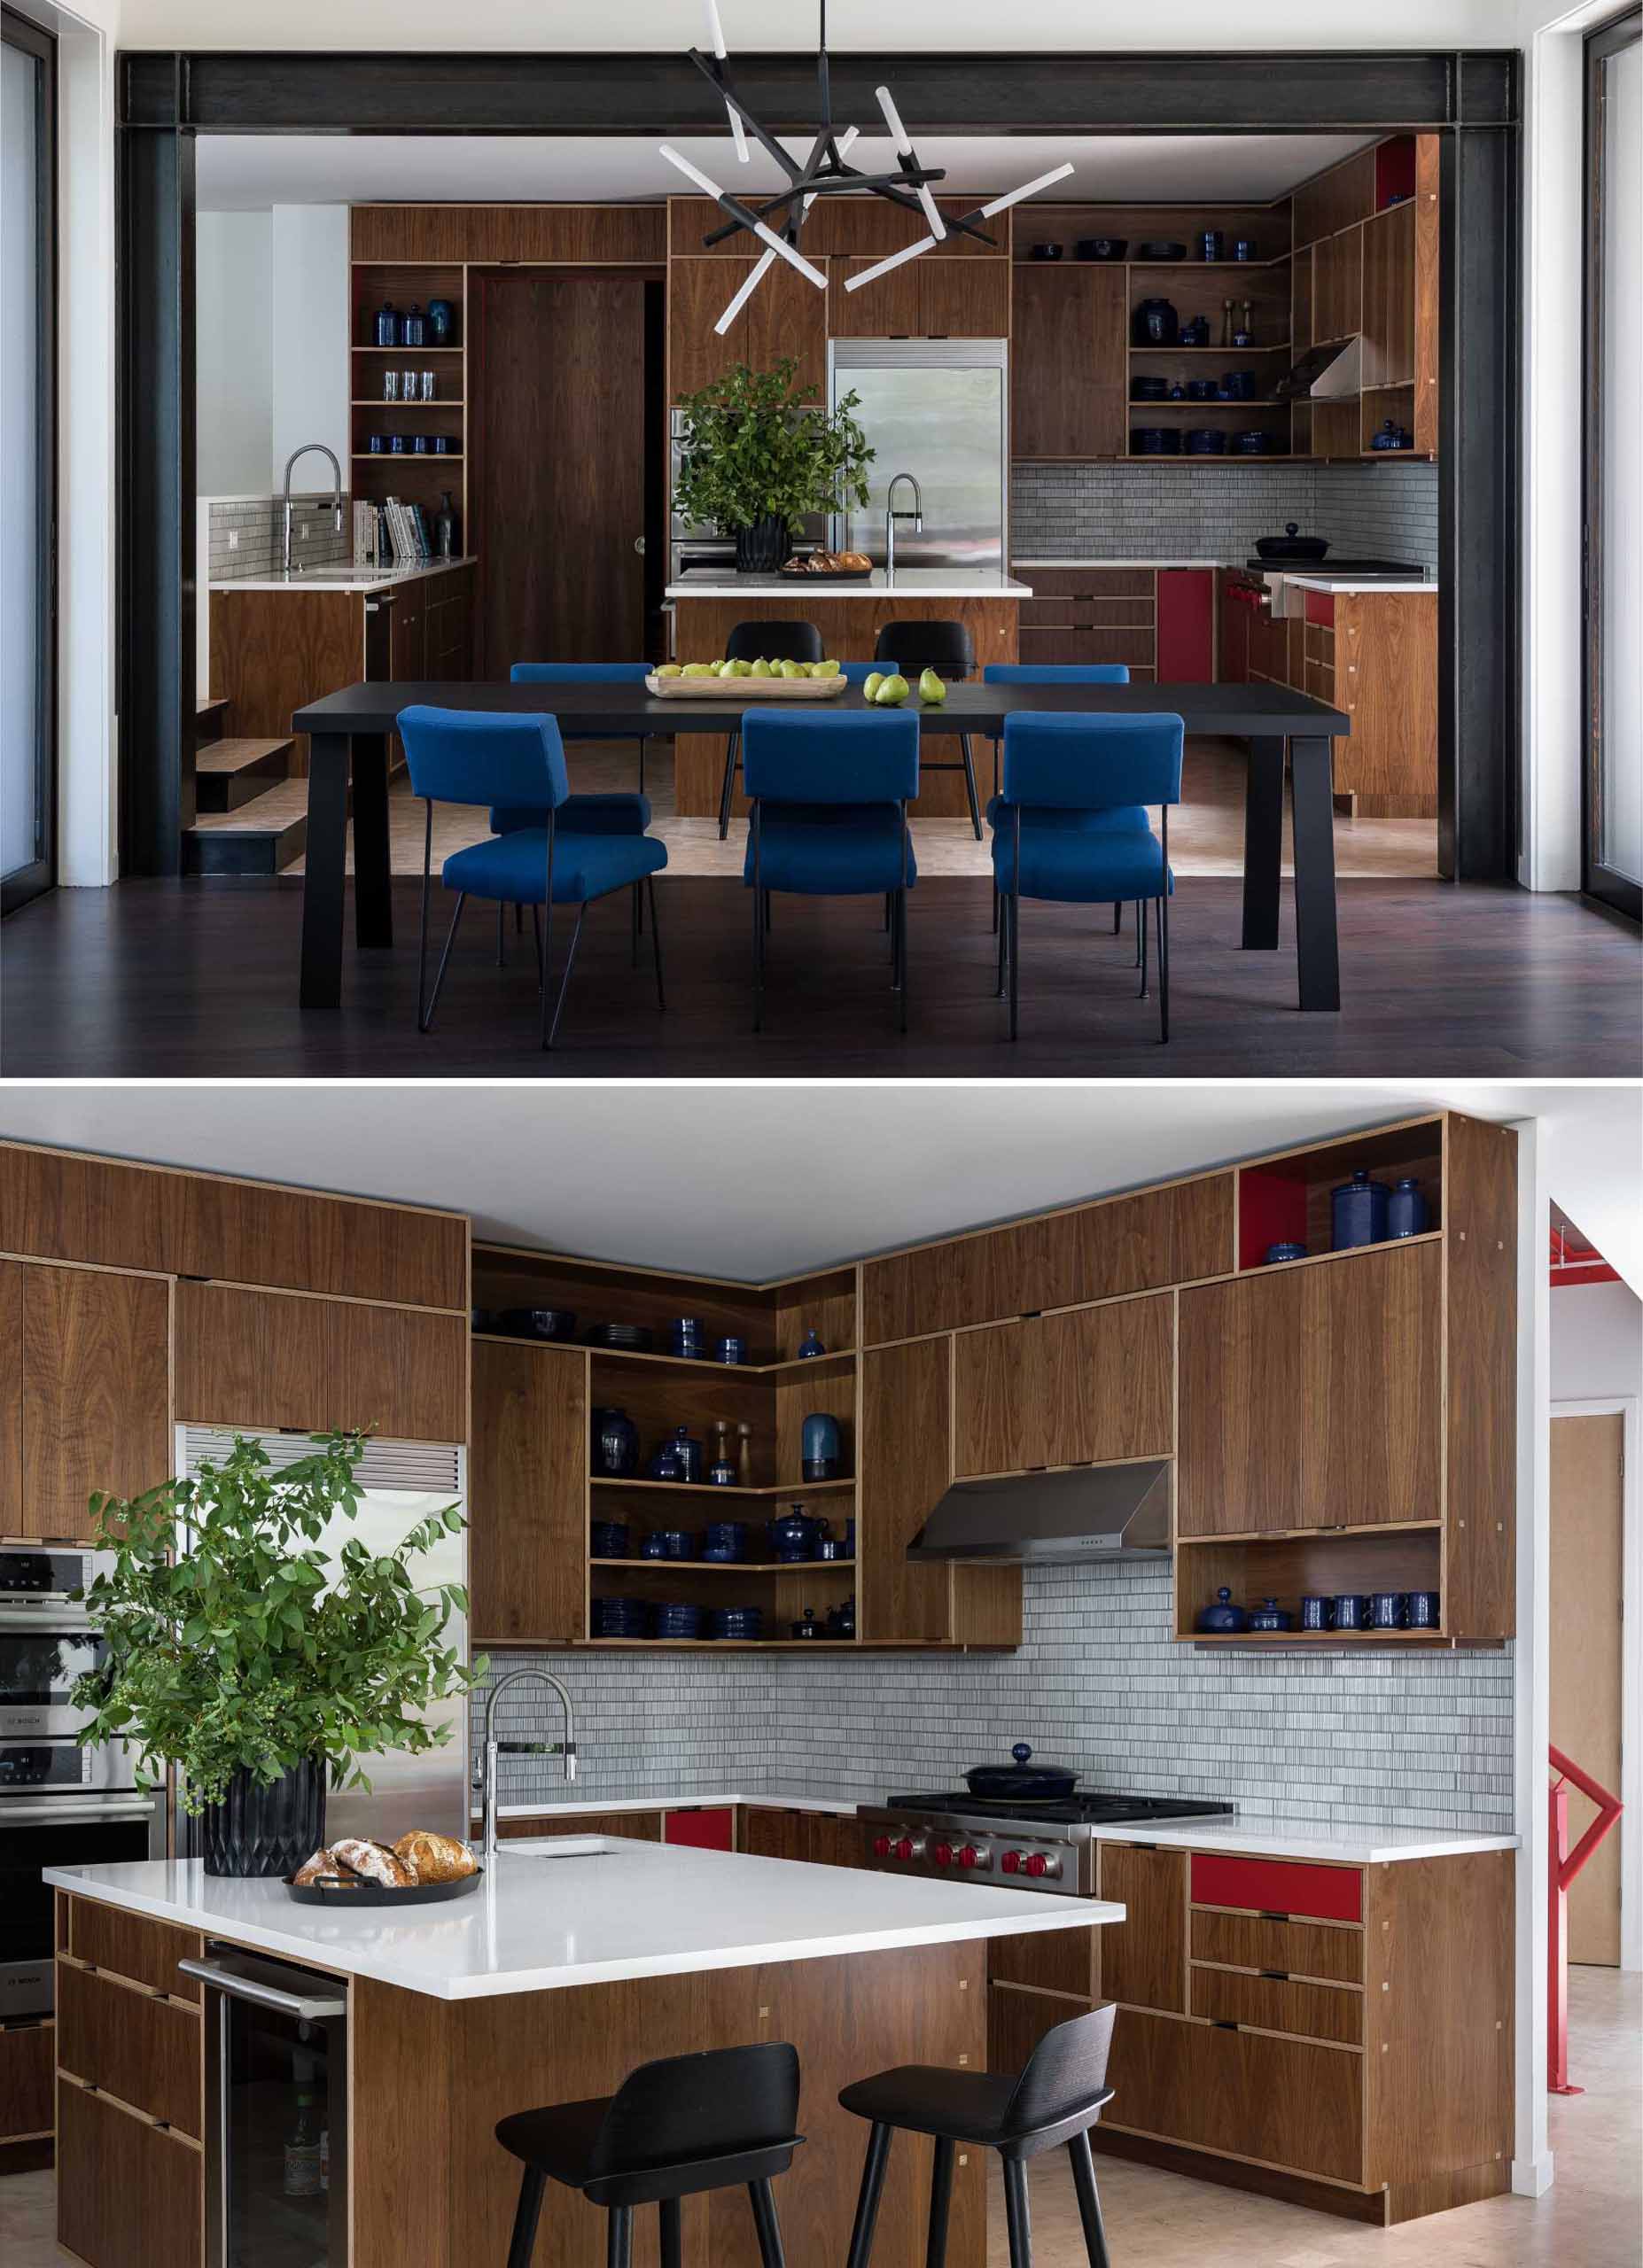 In this contemporary kitchen, wood cabinets and shelves that reach the ceiling are accented by red touches, and the island increases the amount of available counter،e.